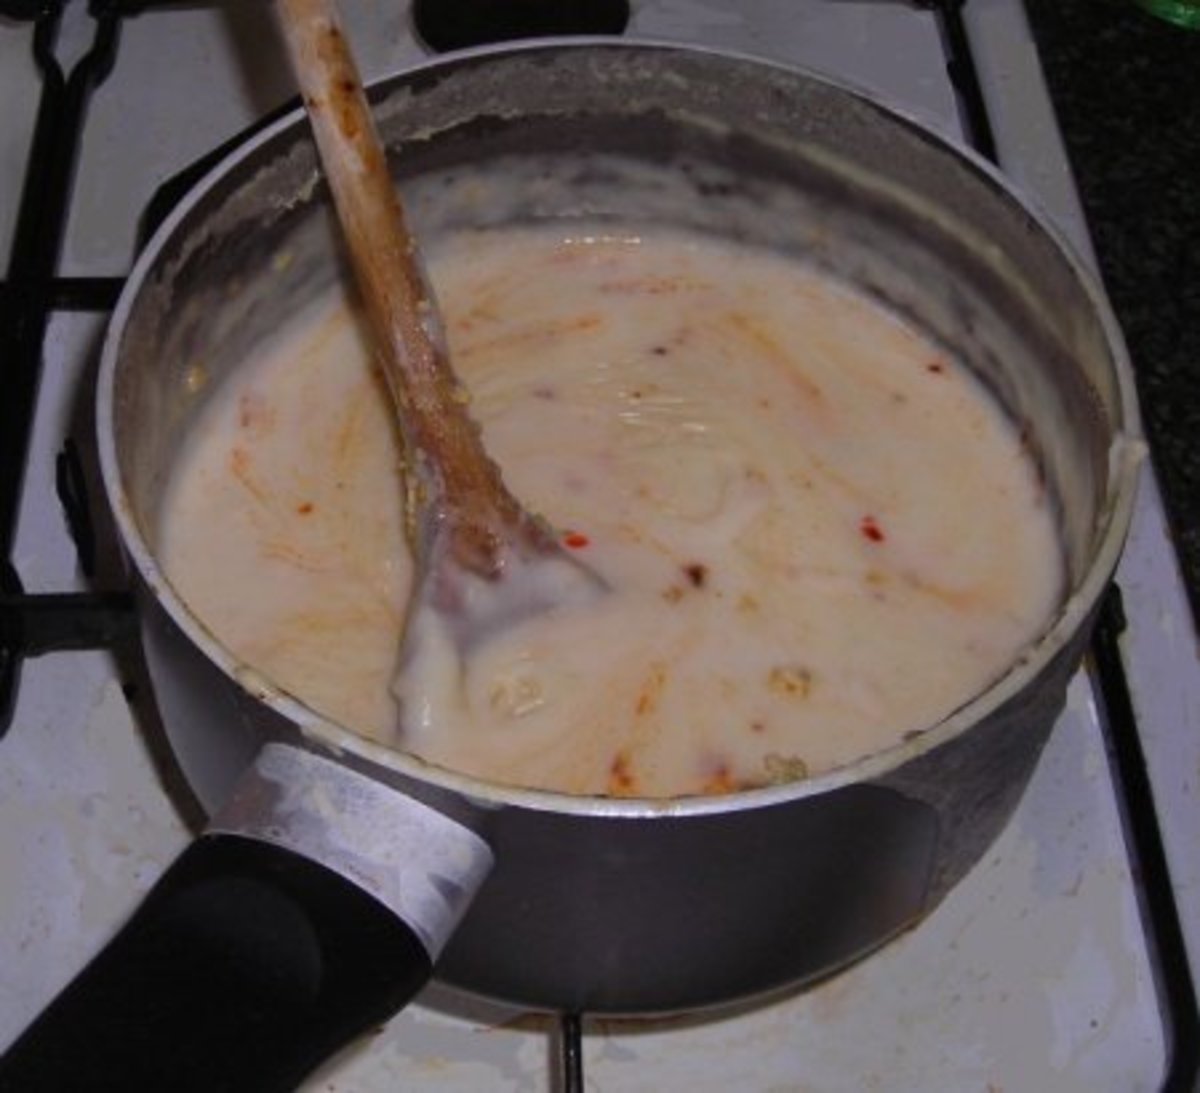 The cheese sauce